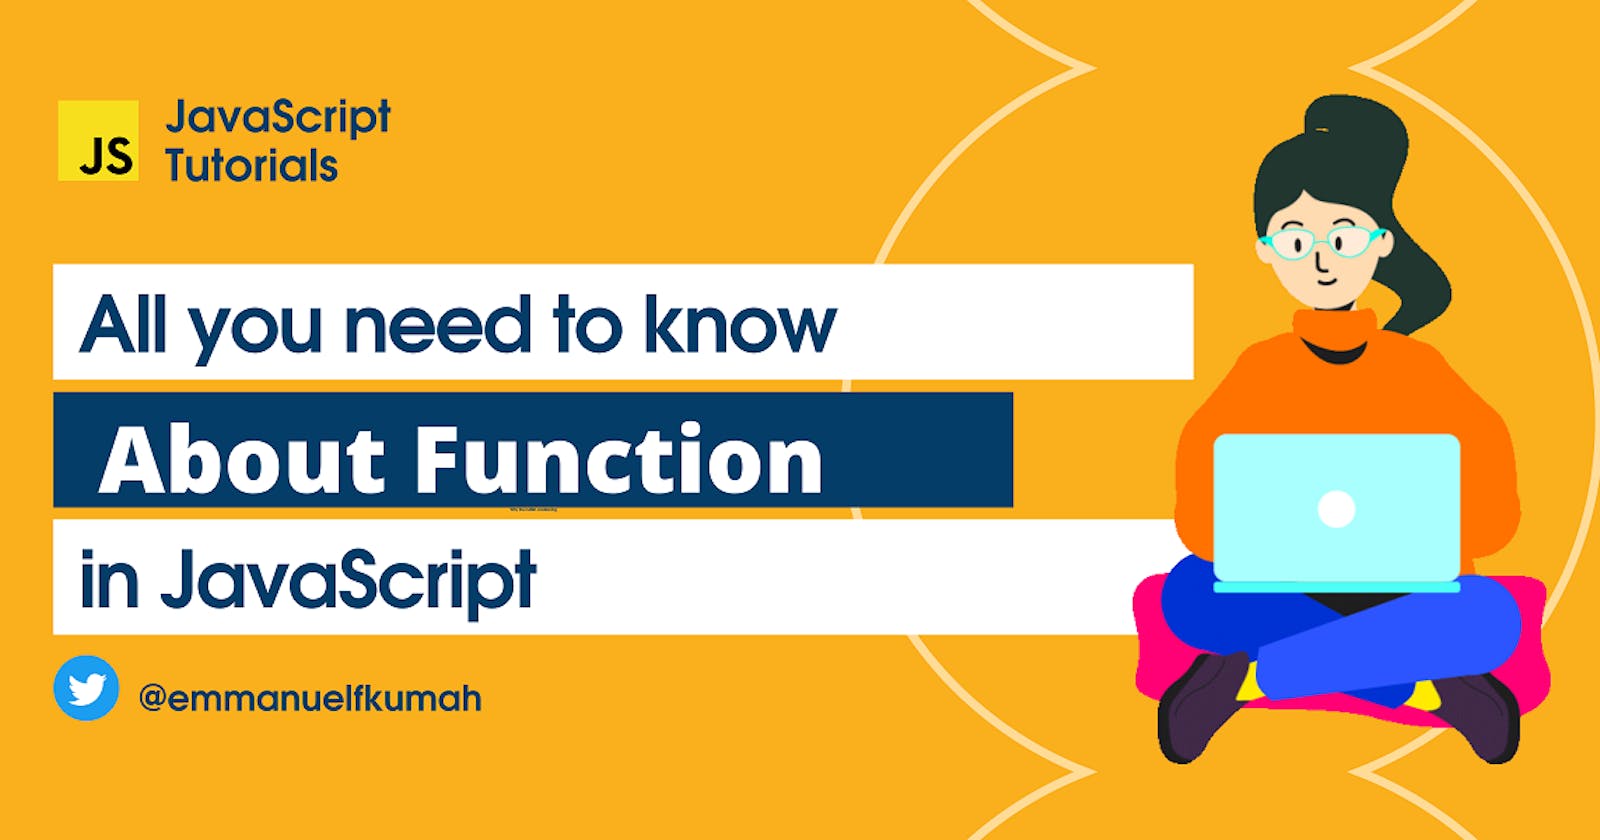 Easy to understand approach to Functions in JavaScript